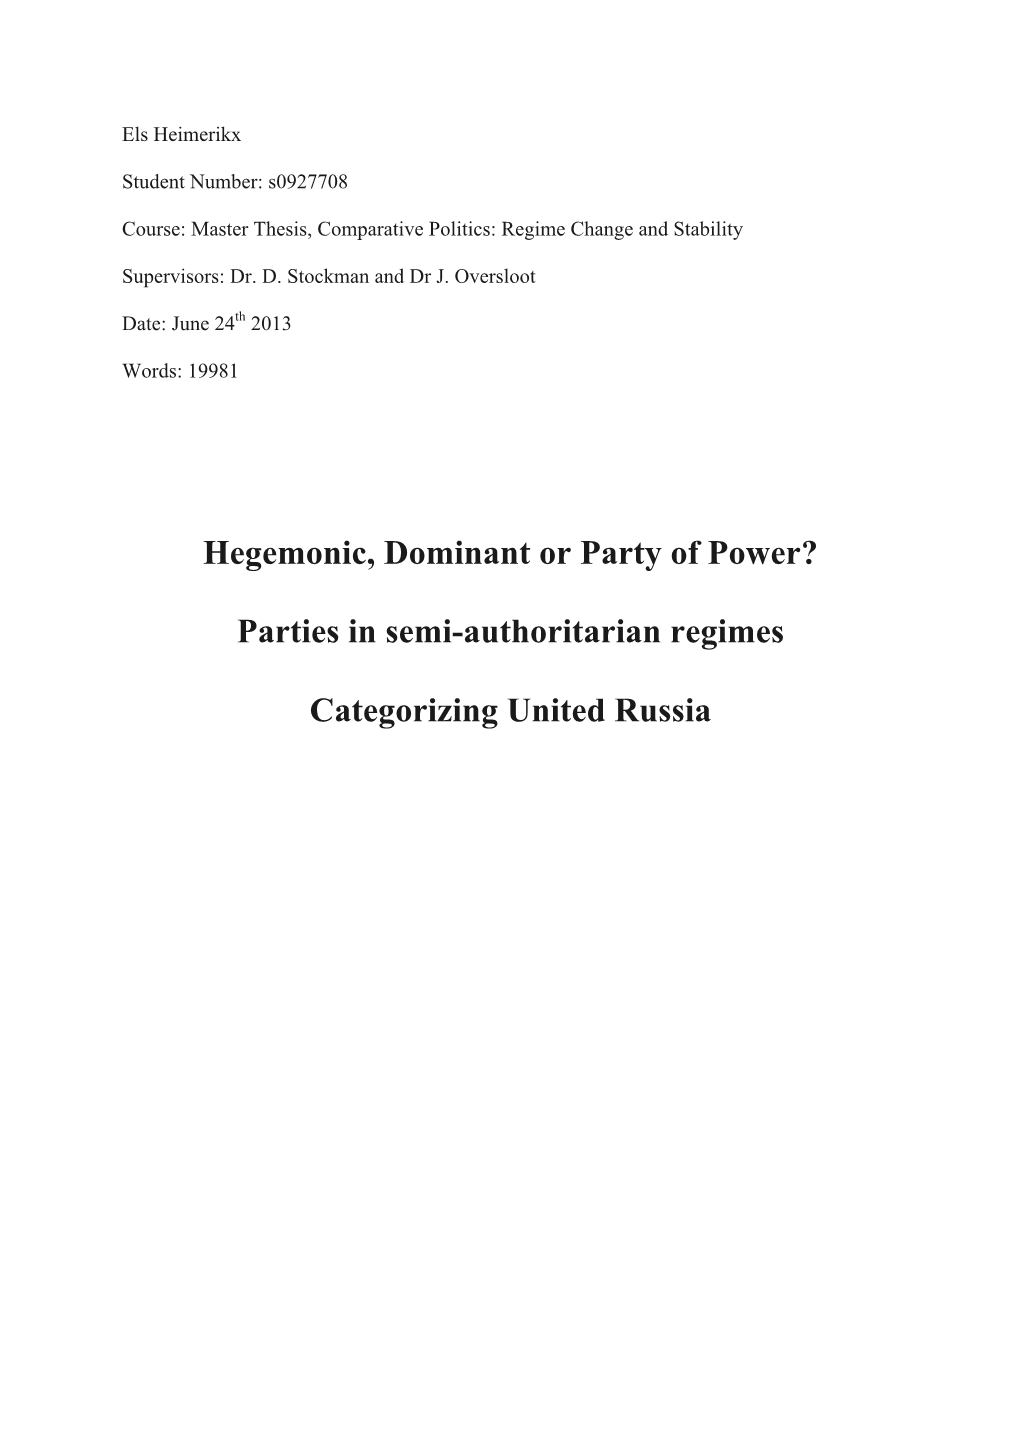 Hegemonic, Dominant Or Party of Power?